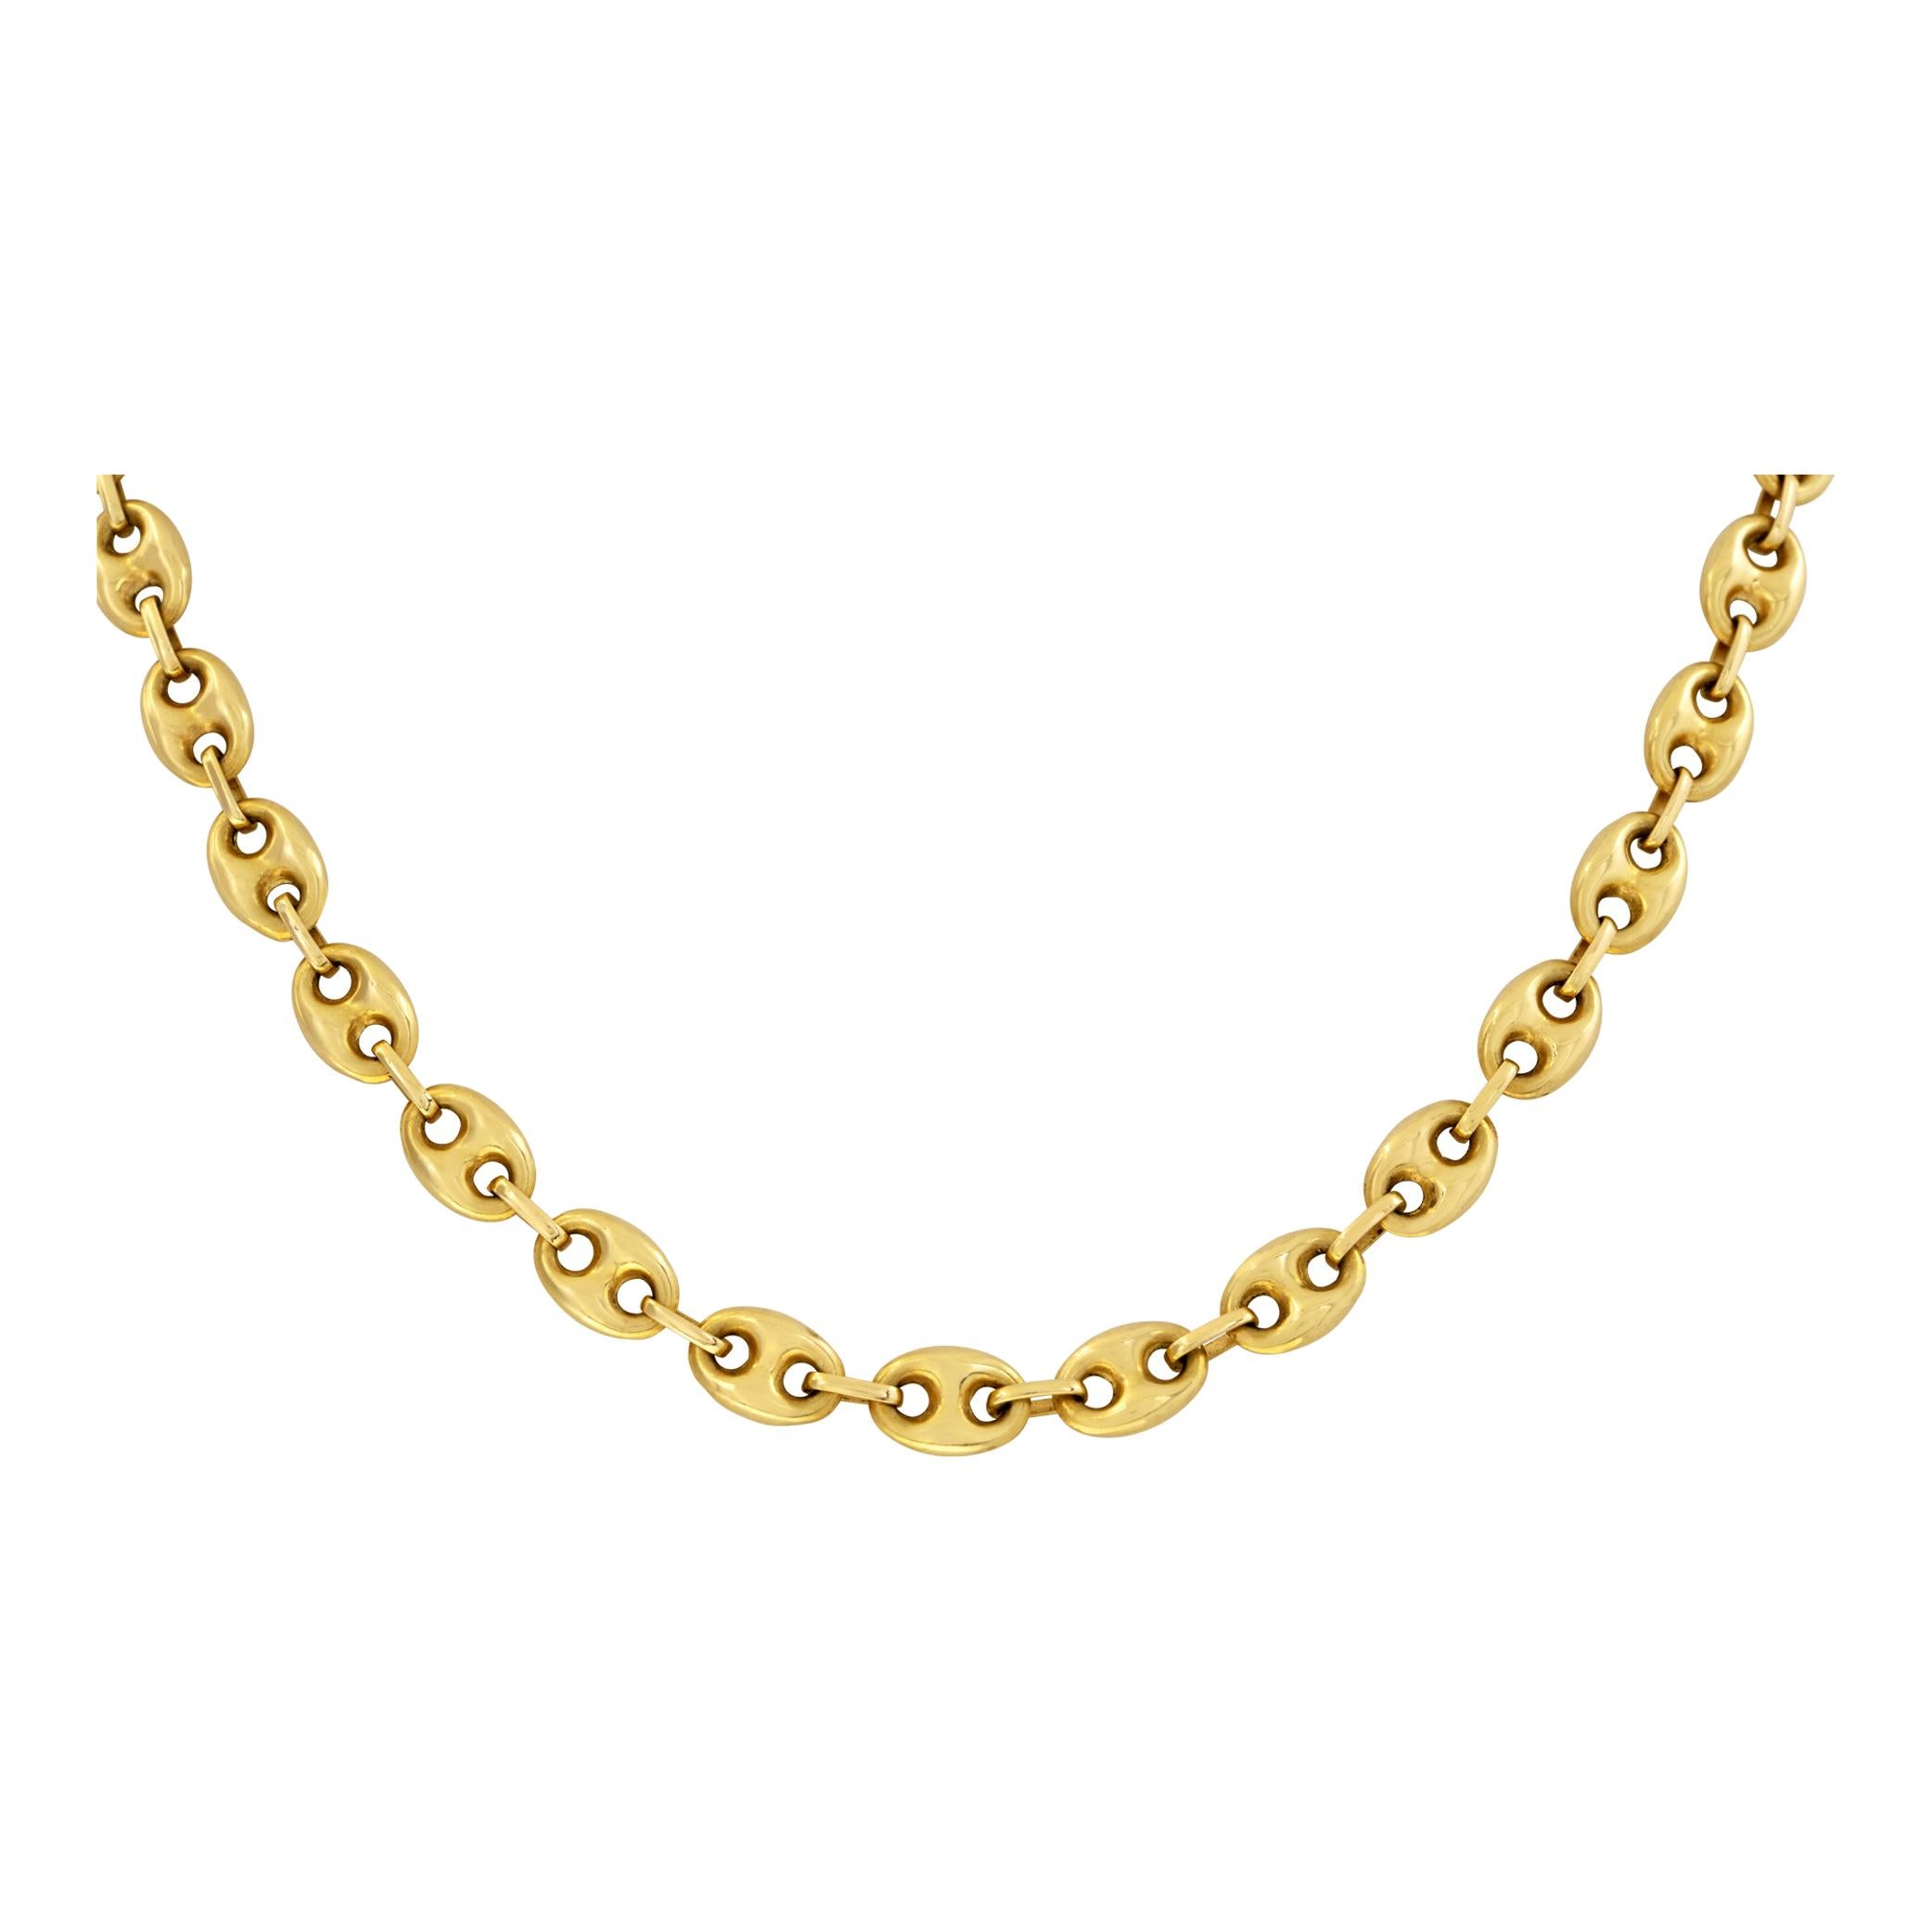 Nautical links chain in 18k yellow gold with lobster clasp.Width 6.7 mm. Length 20 inches.
